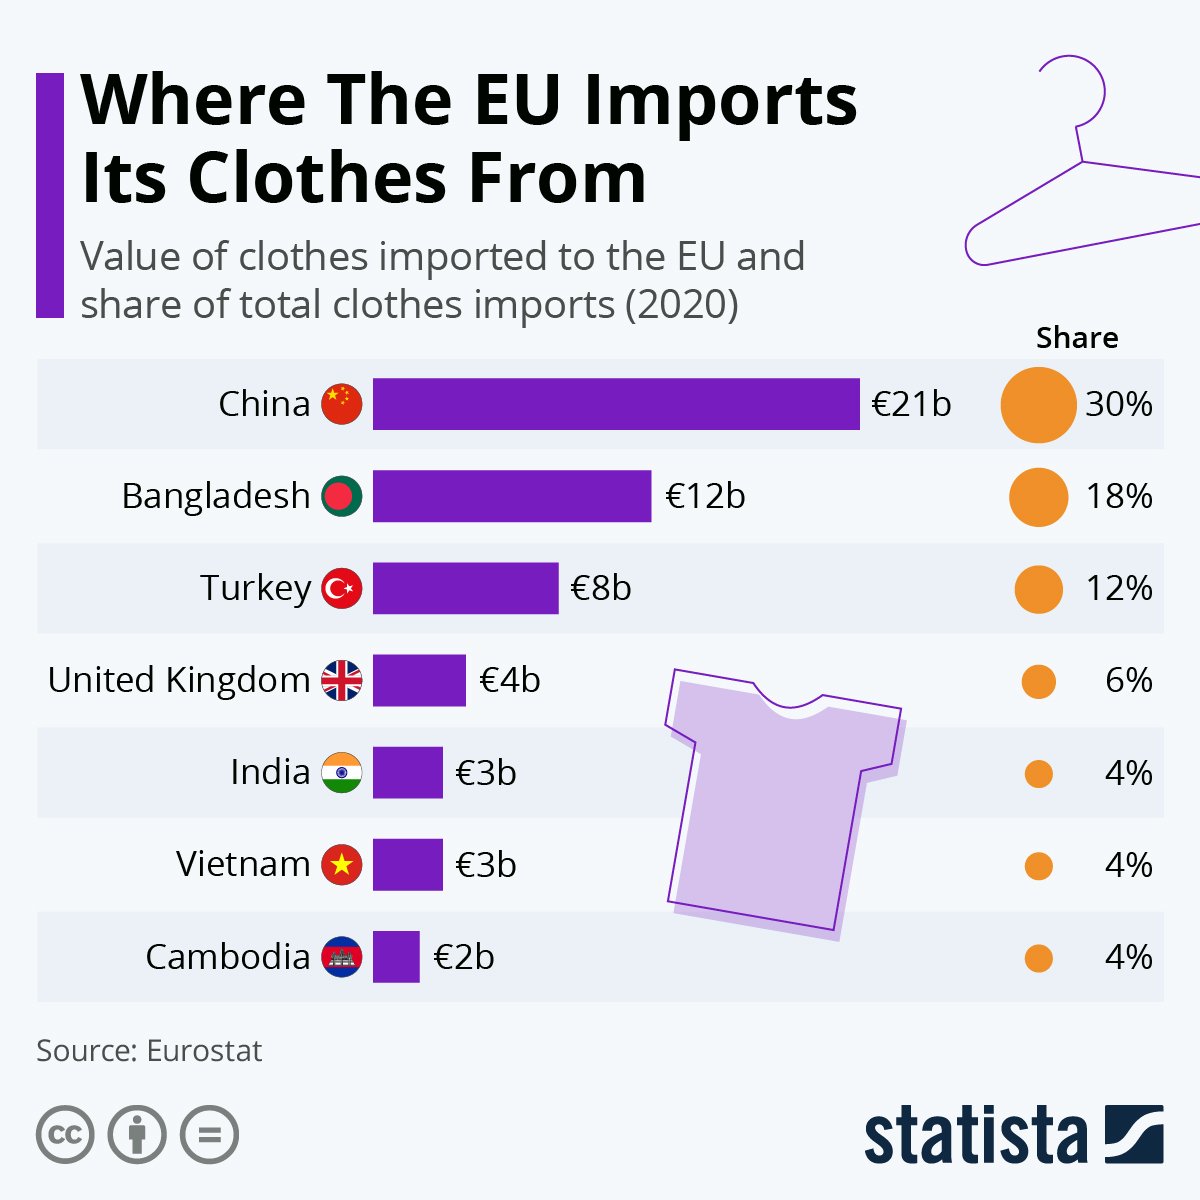 Where does the EU imports its clothes from?